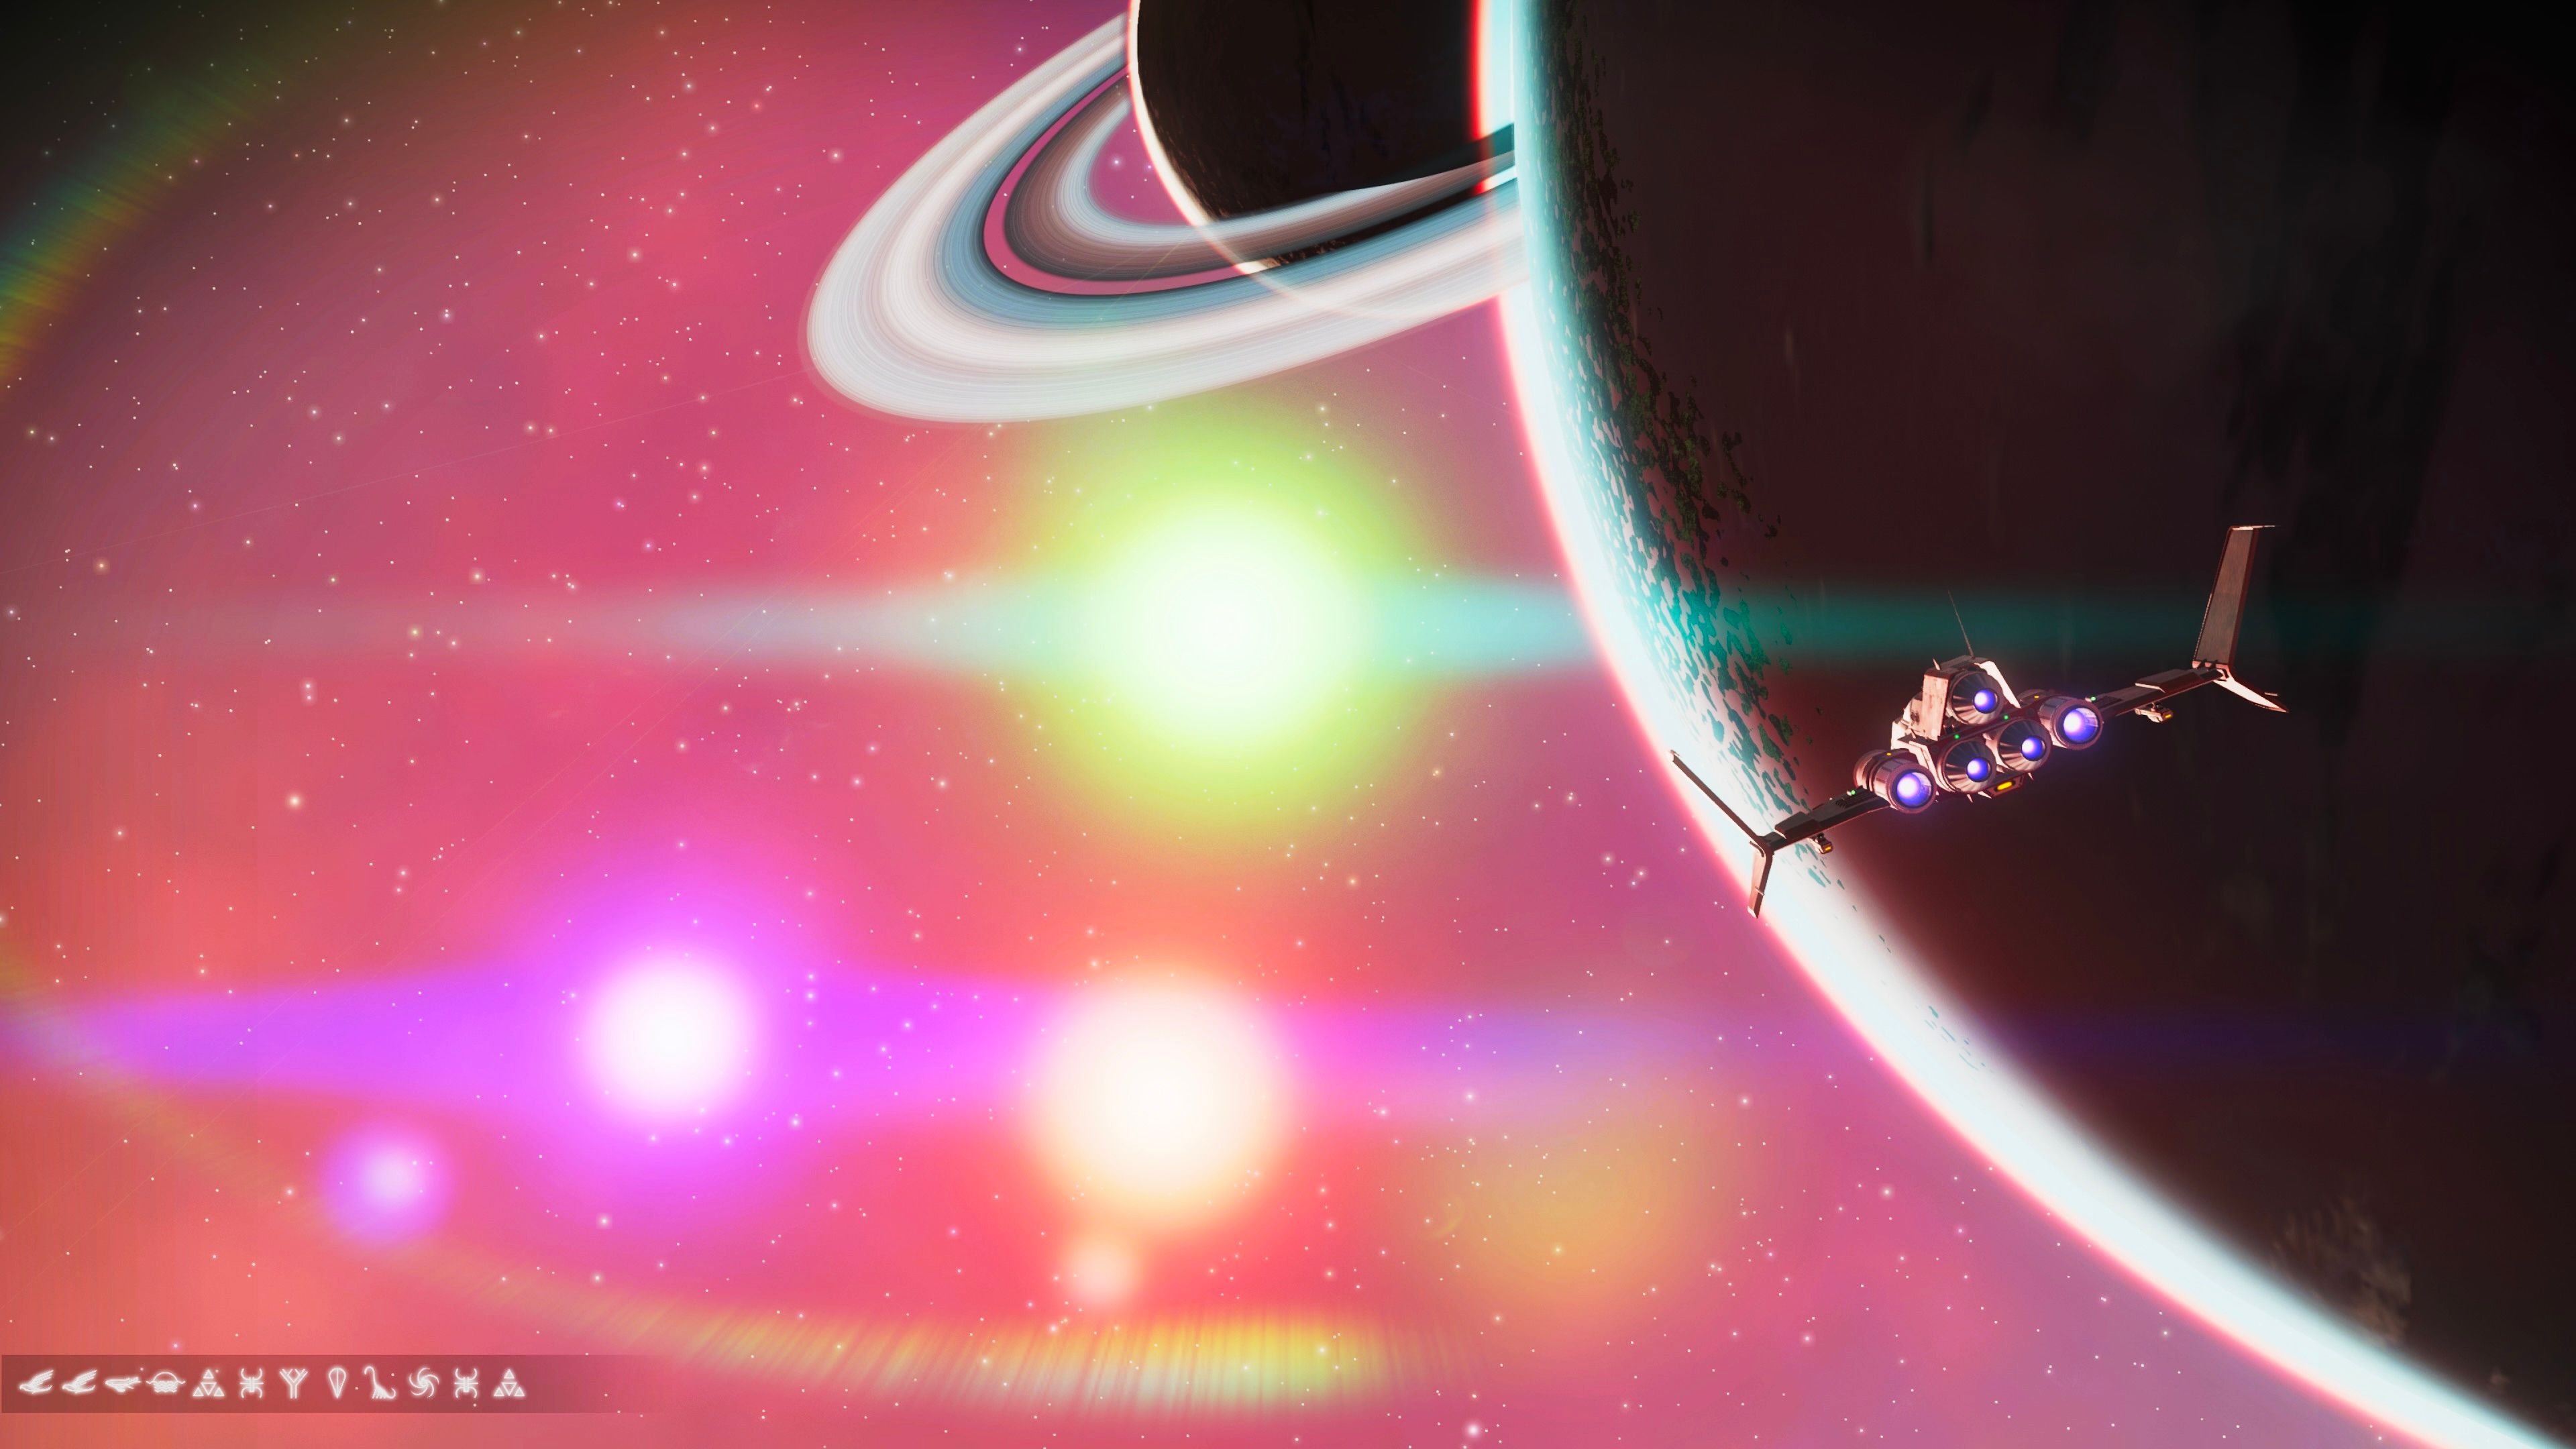 A screenshot from the game No Man's Sky. There's a starship in orbit above the bulk of a planet at the right, and behind the rim of the planet is another one with rings. In the distance are three different coloured suns.